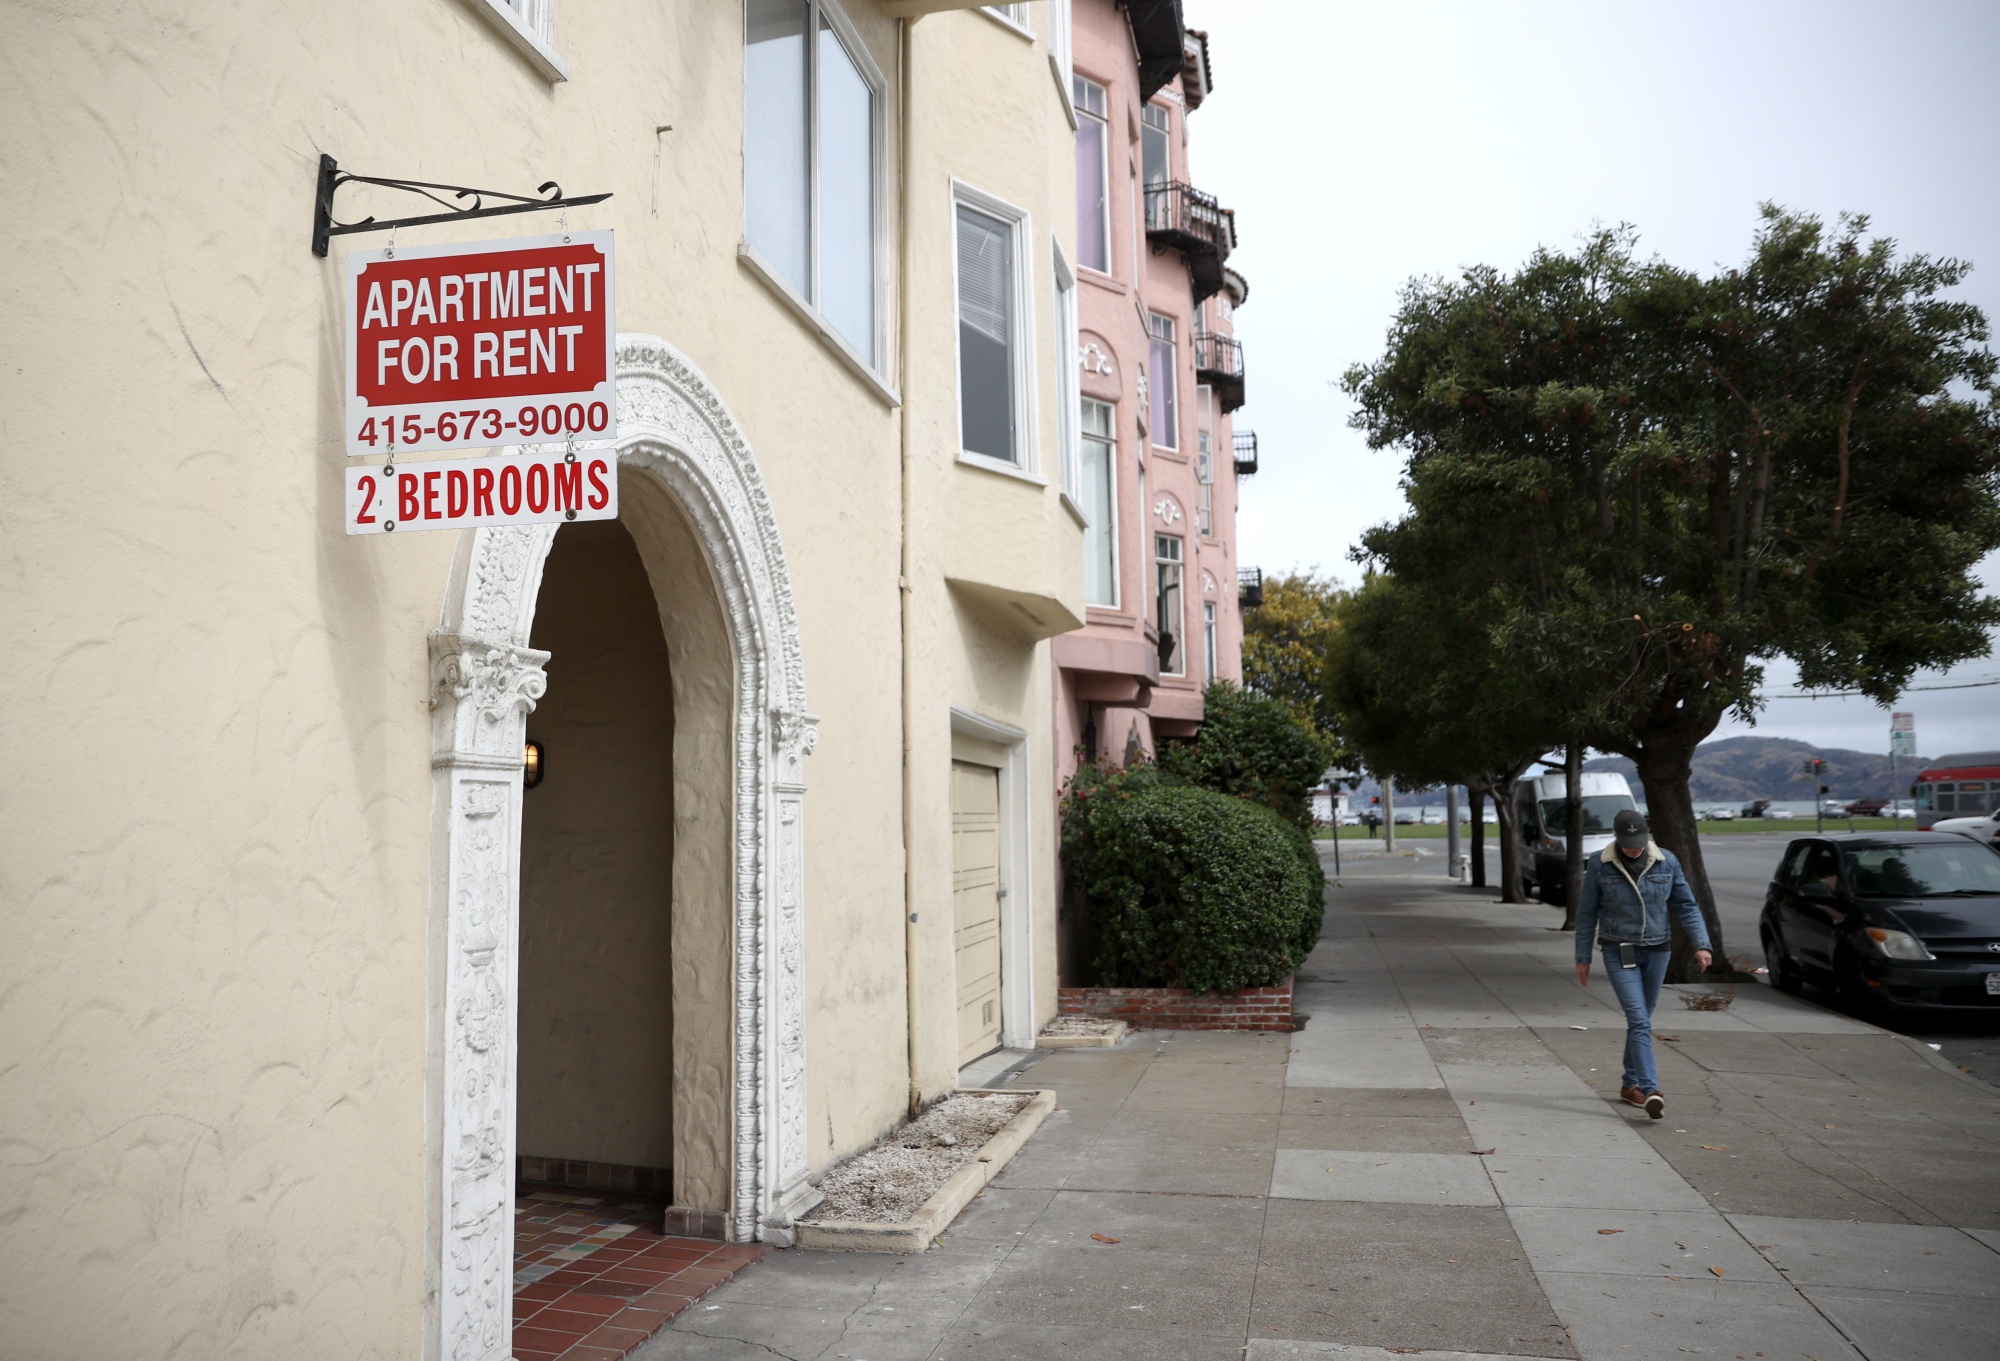 A pedestrian walks by a &quot;for rent&quot; sign in front of an apartment building&nbsp;in San Francisco, where prices have surged back to pre-pandemic levels.&nbsp;